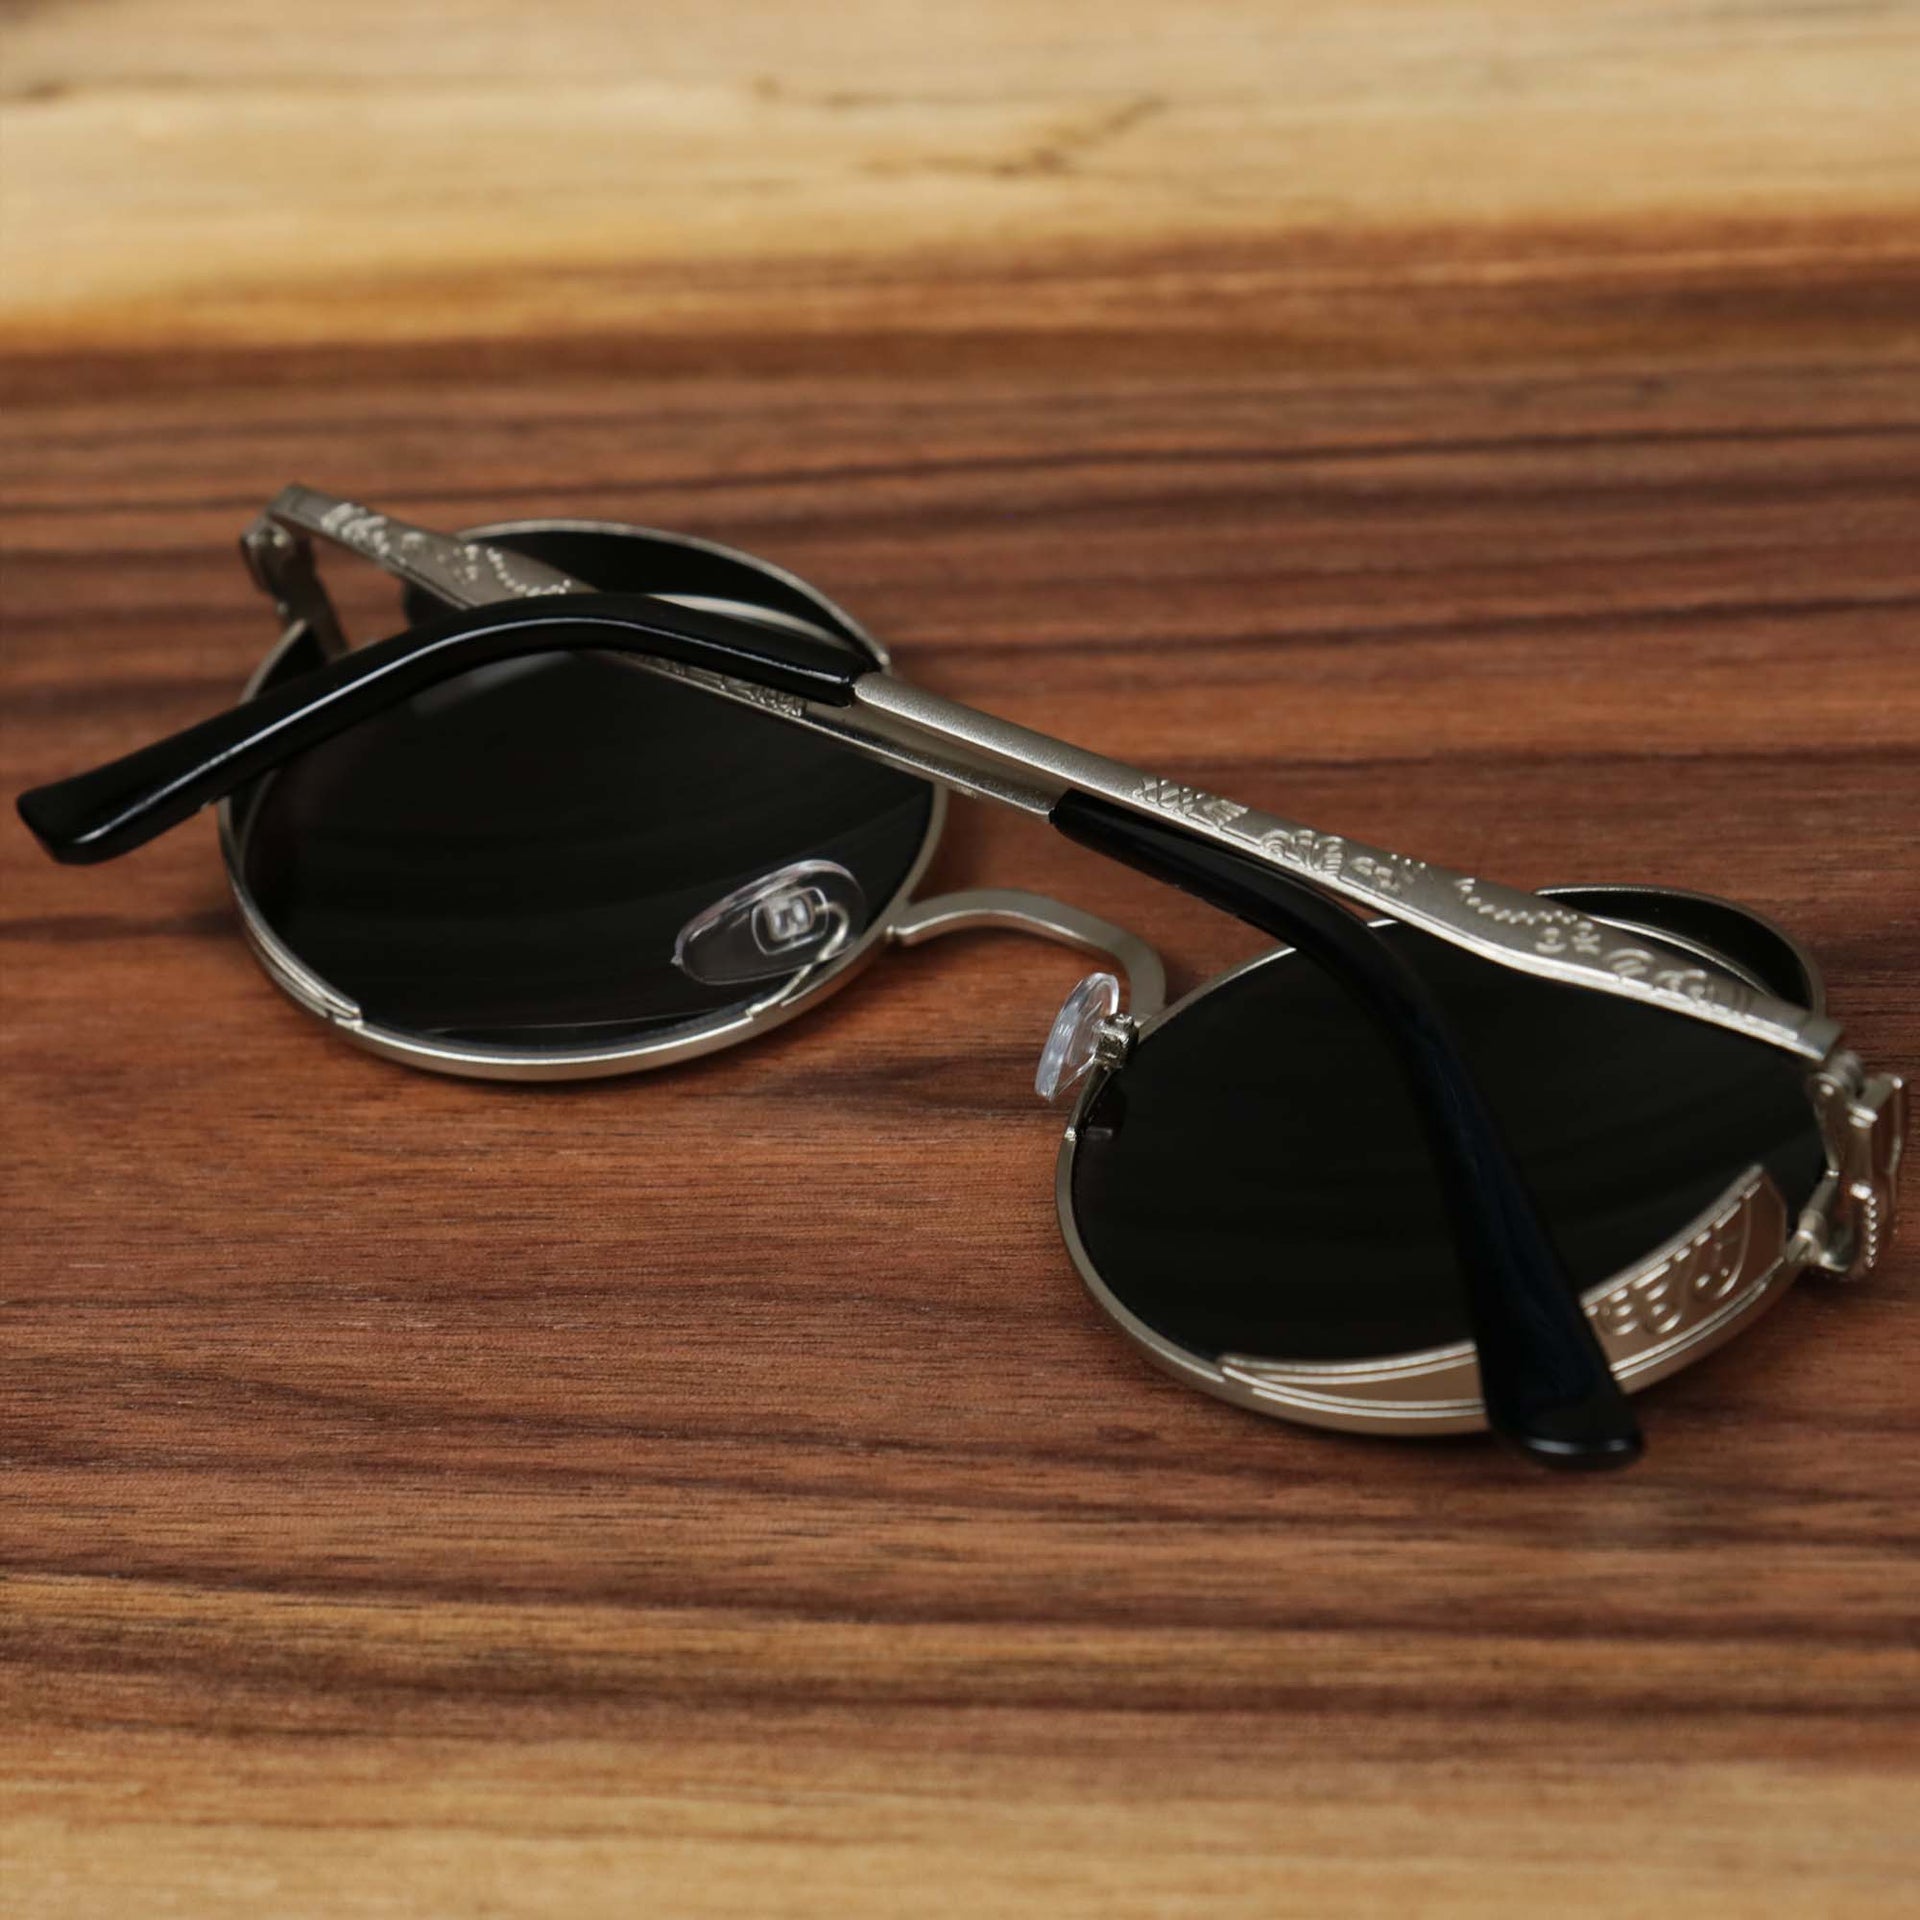 The Round Frame Arched Bridge Black Lens Sunglasses with Silver Frame folded up